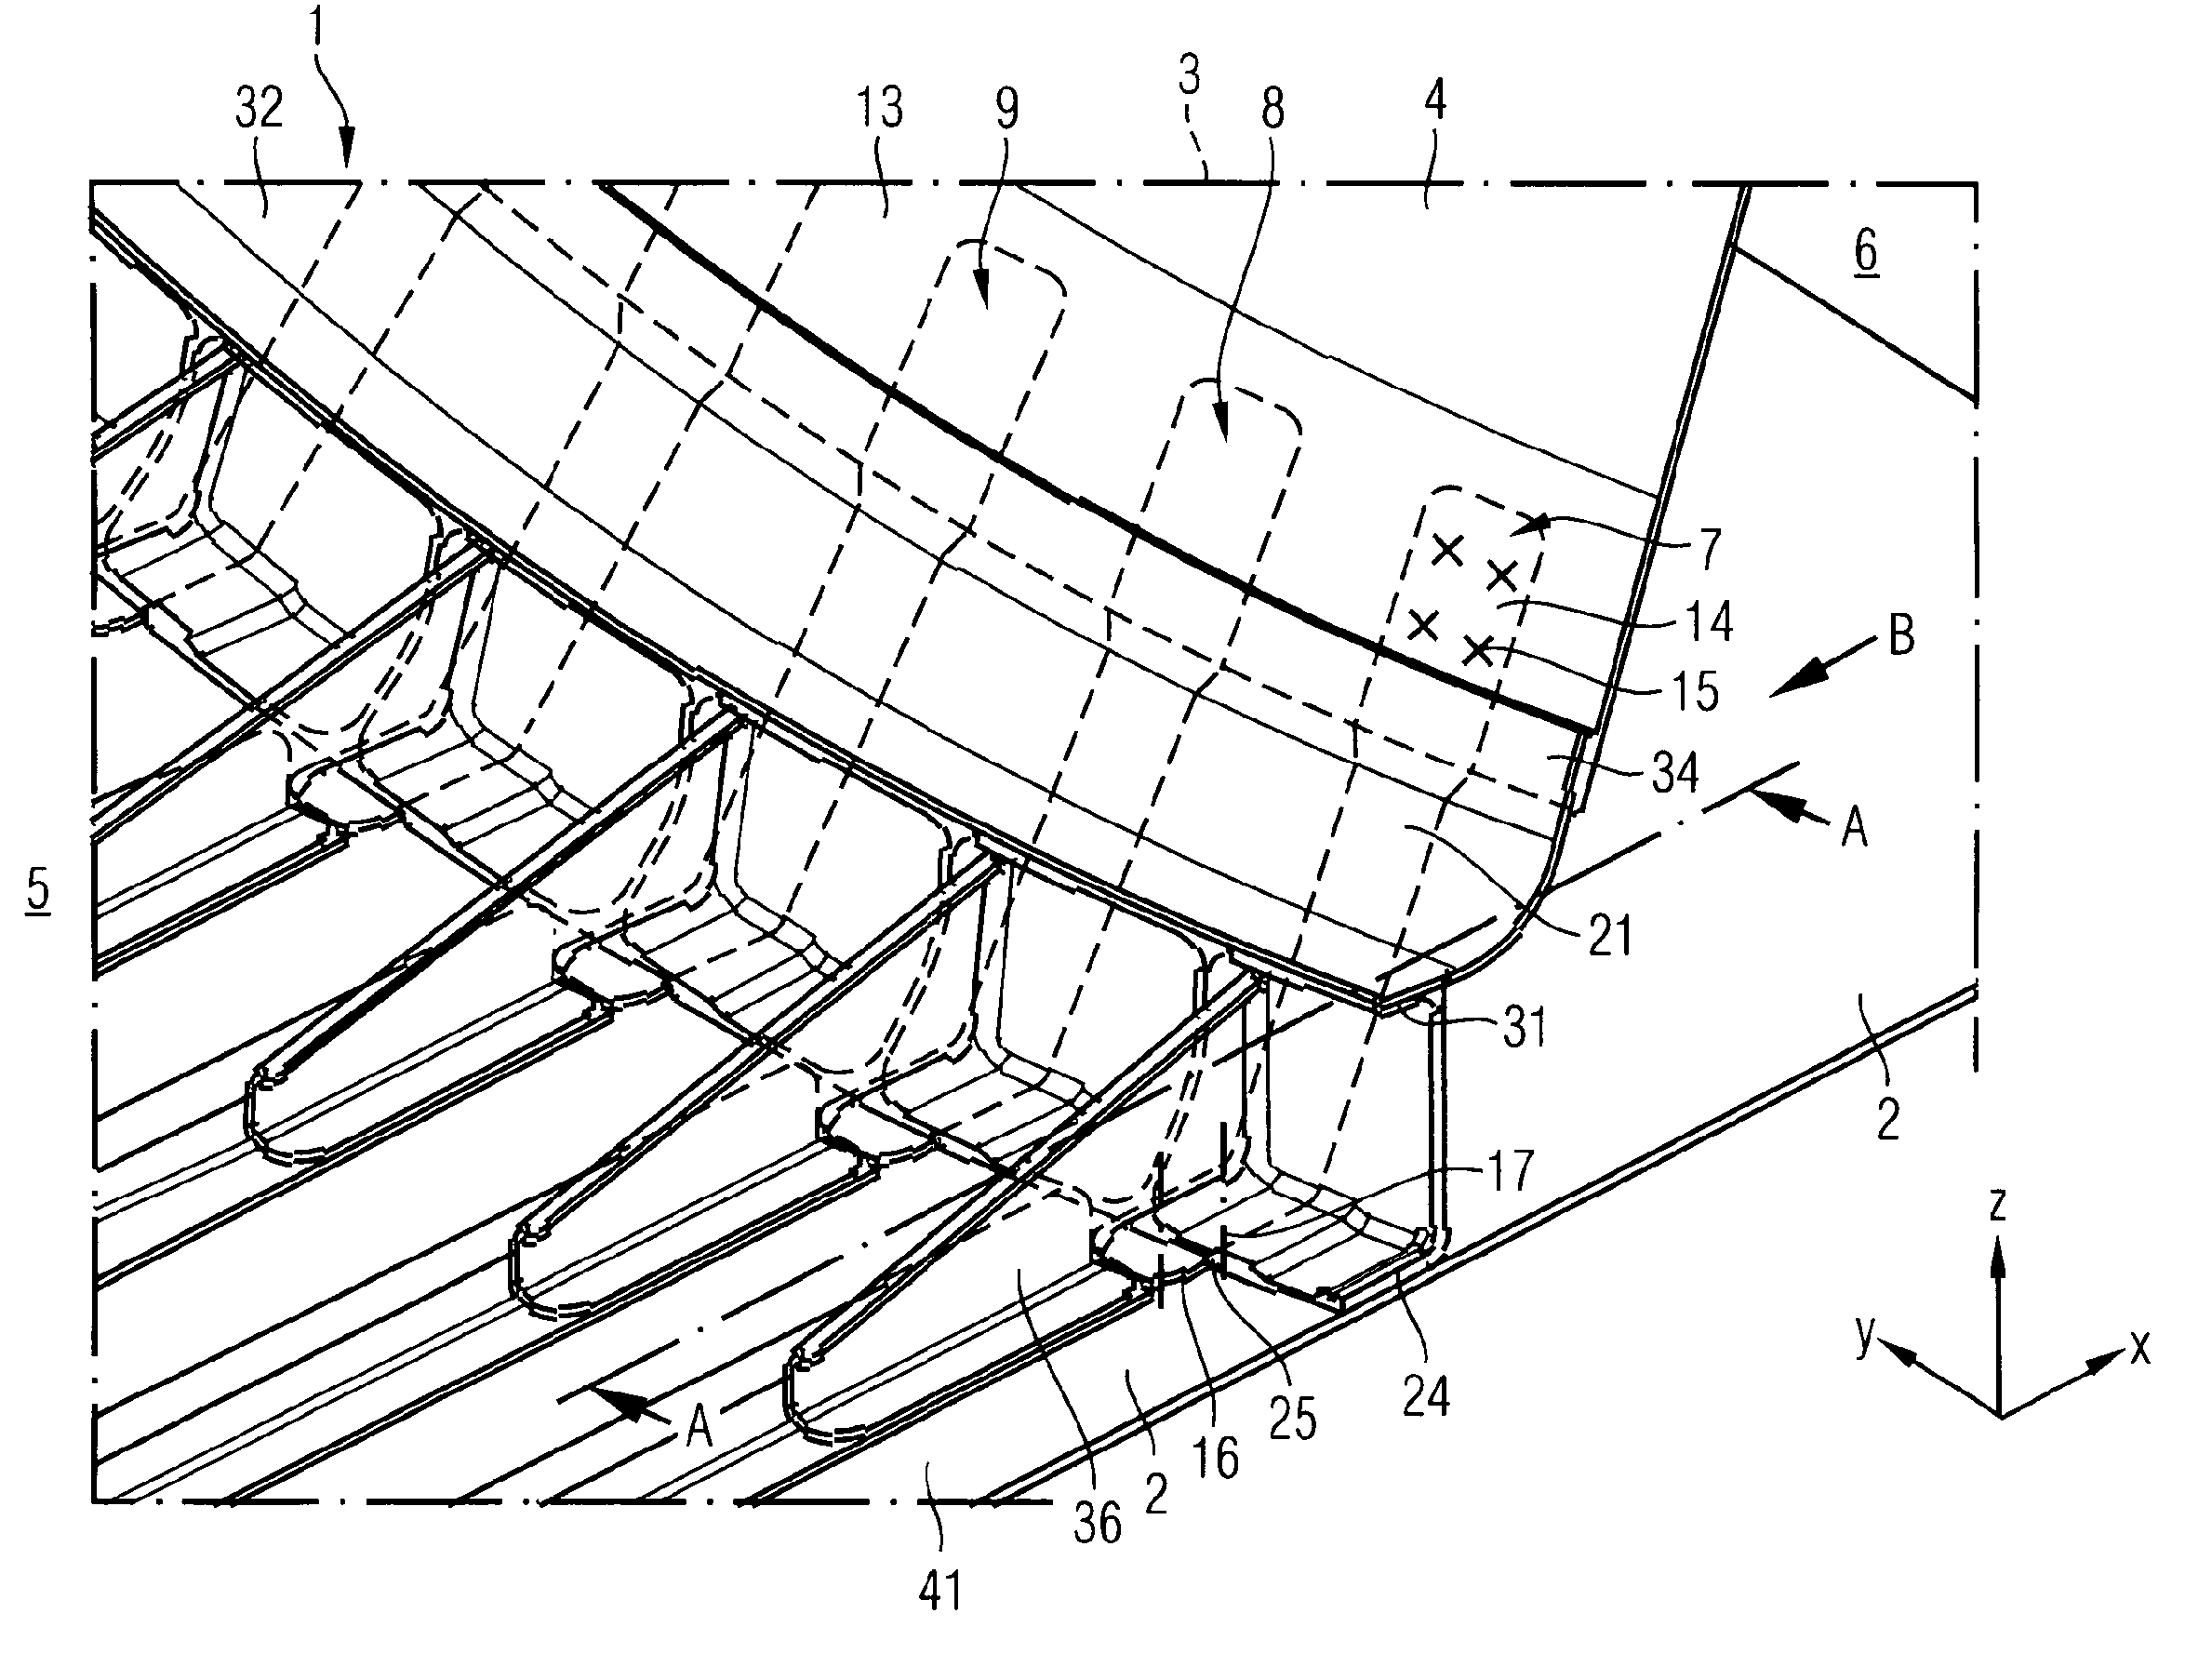 Structure, especially a fuselage structure of an aircraft or a spacecraft